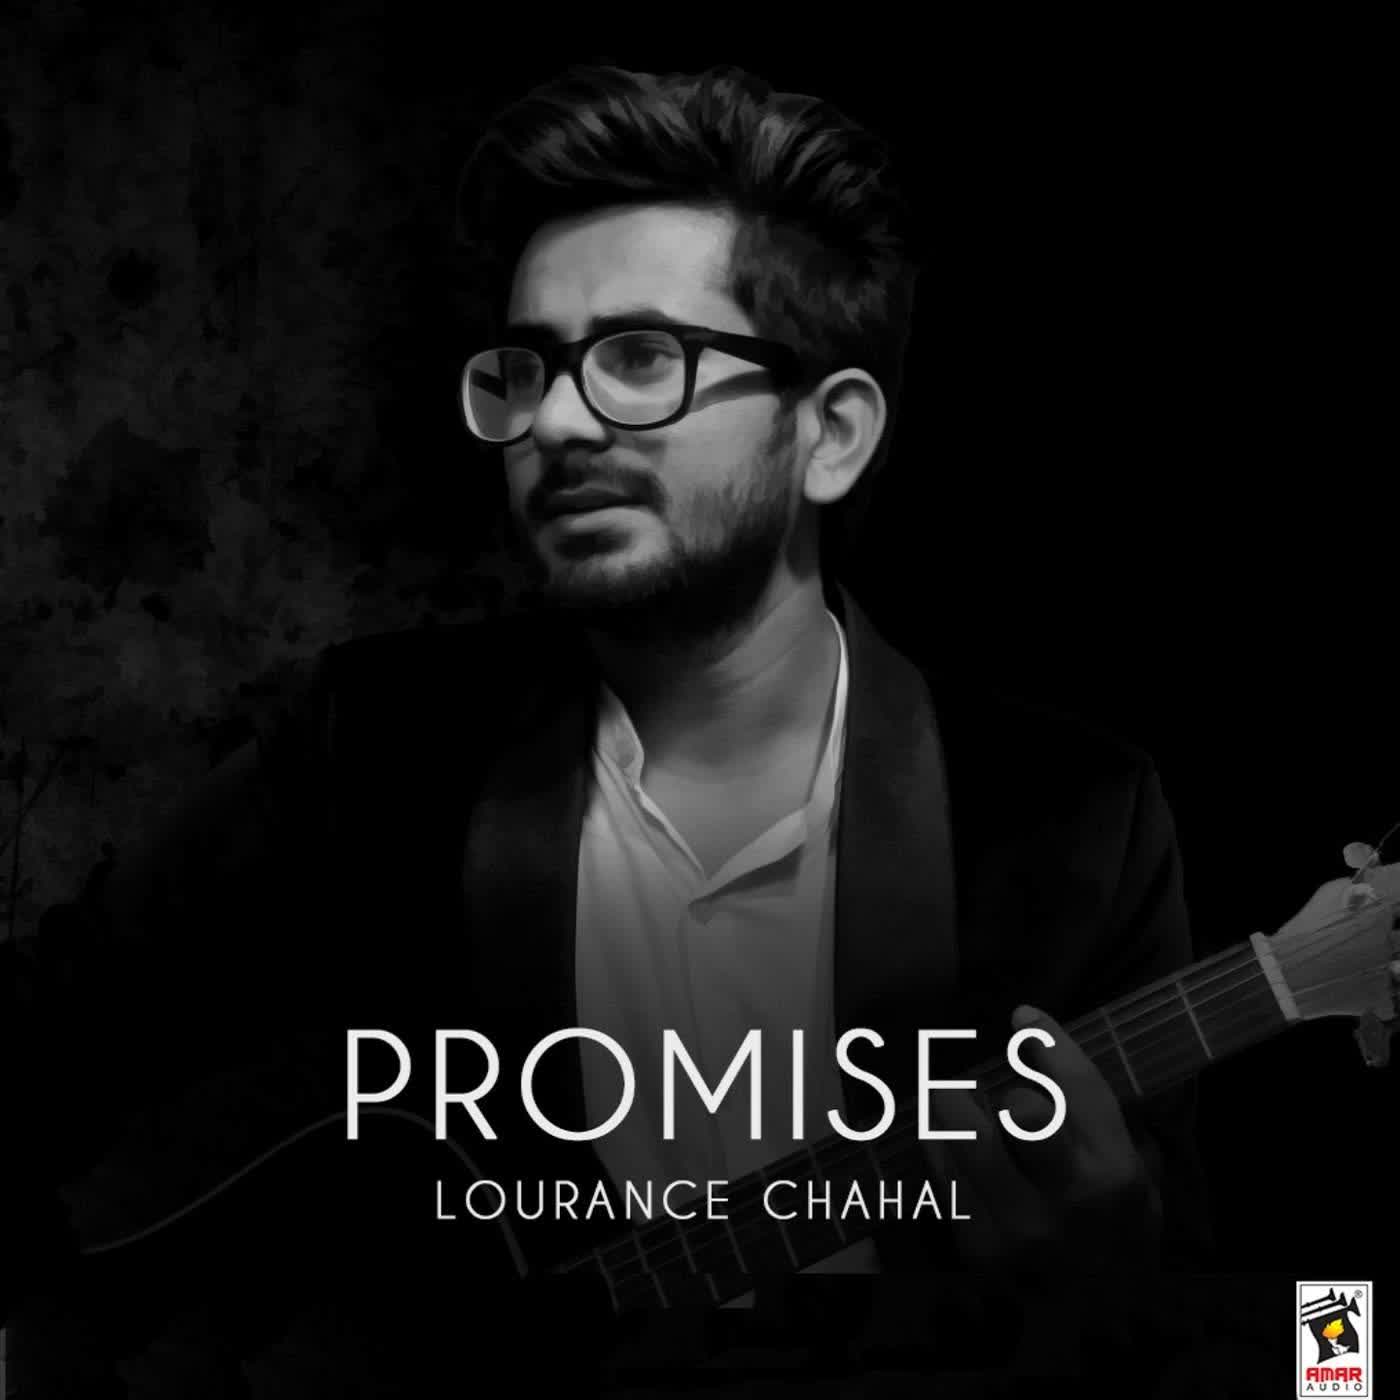 Promises Lourance Chahal Mp3 Song